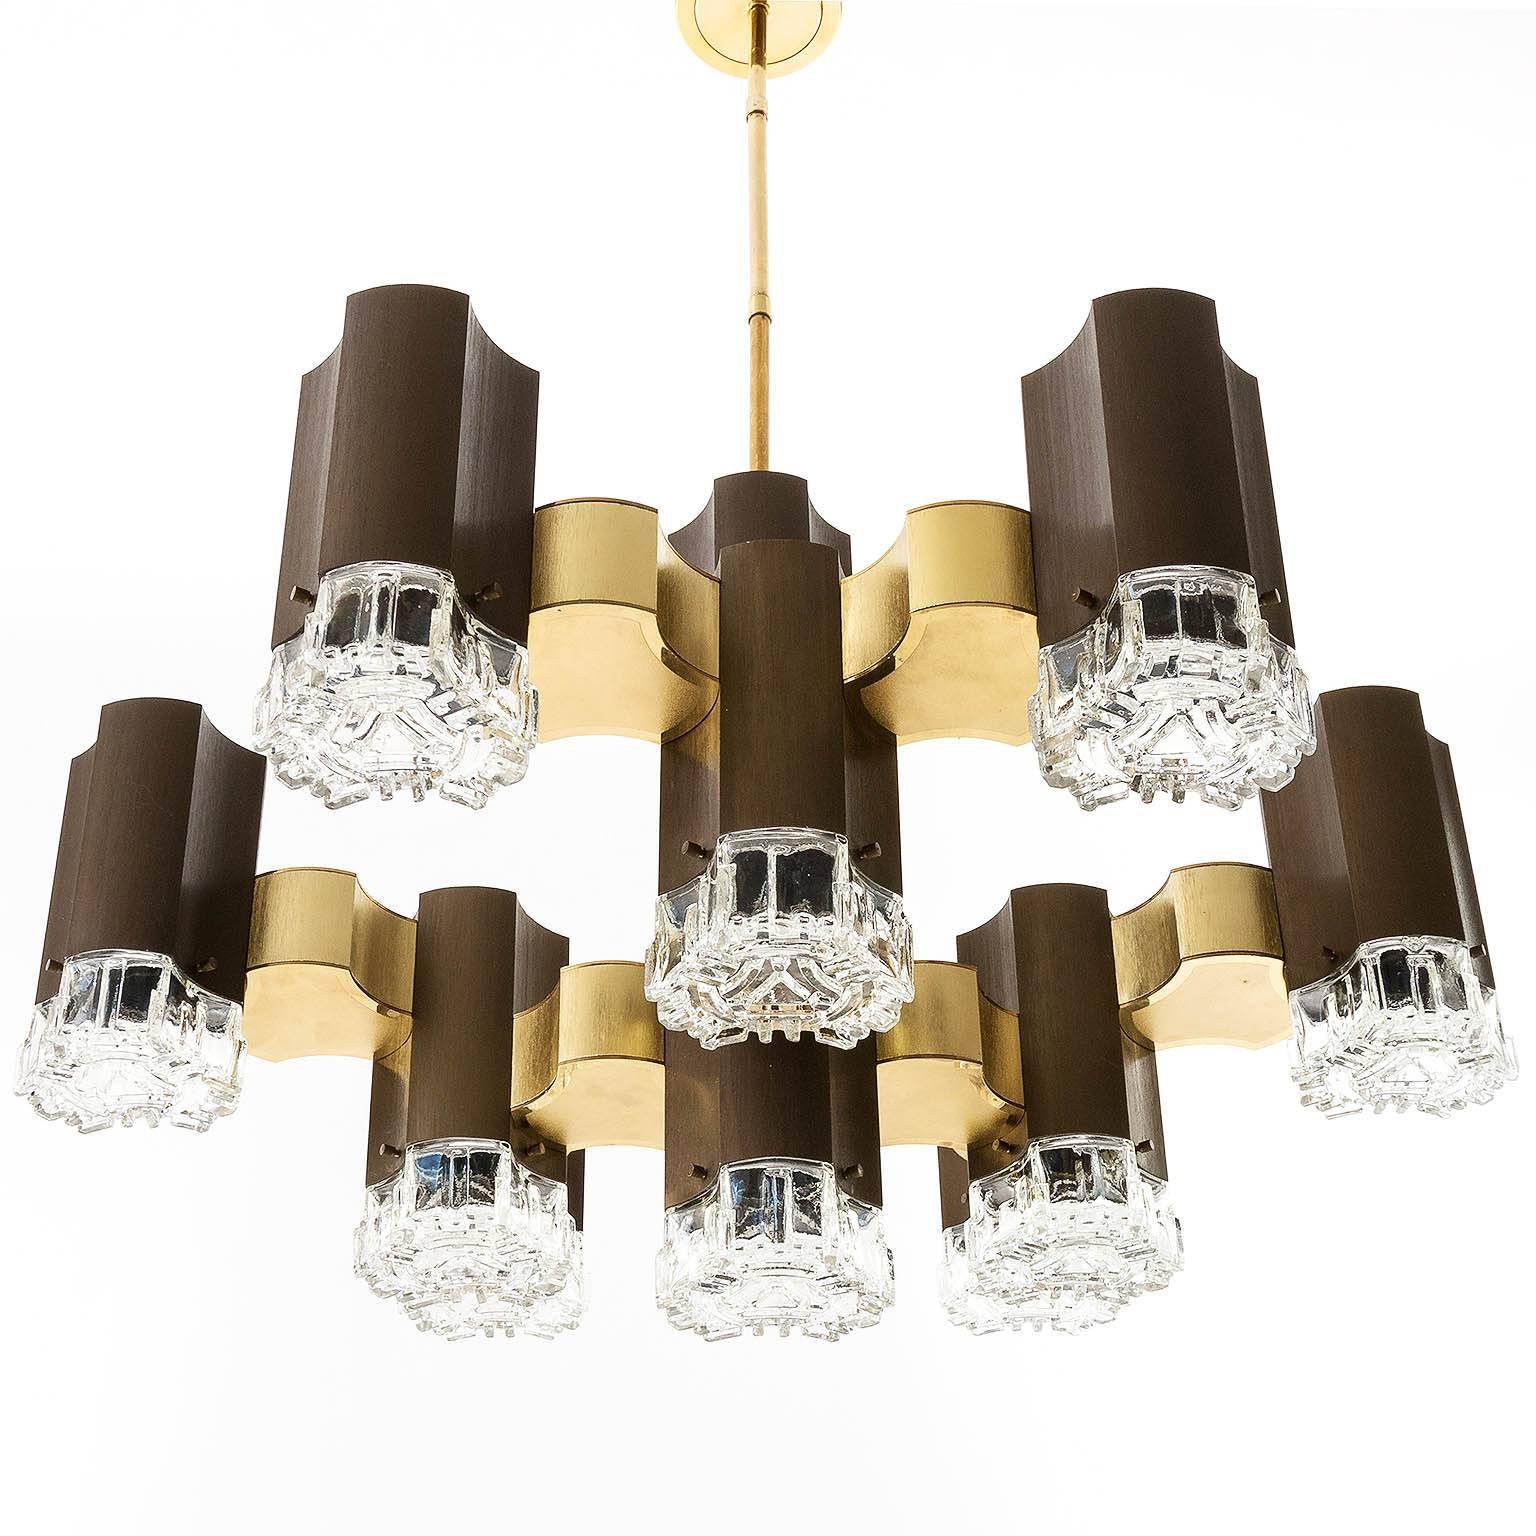 Huge and impressive bronze and gold chandelier by Gaetano Sciolari, Italy, 1970s.

Measures: Diameter 31 in (79 cm).
Height: Glass body only 19.7 in (50 cm)/including stem and canopy 43.3 inch (110 cm).
The length of the stem can be altered to